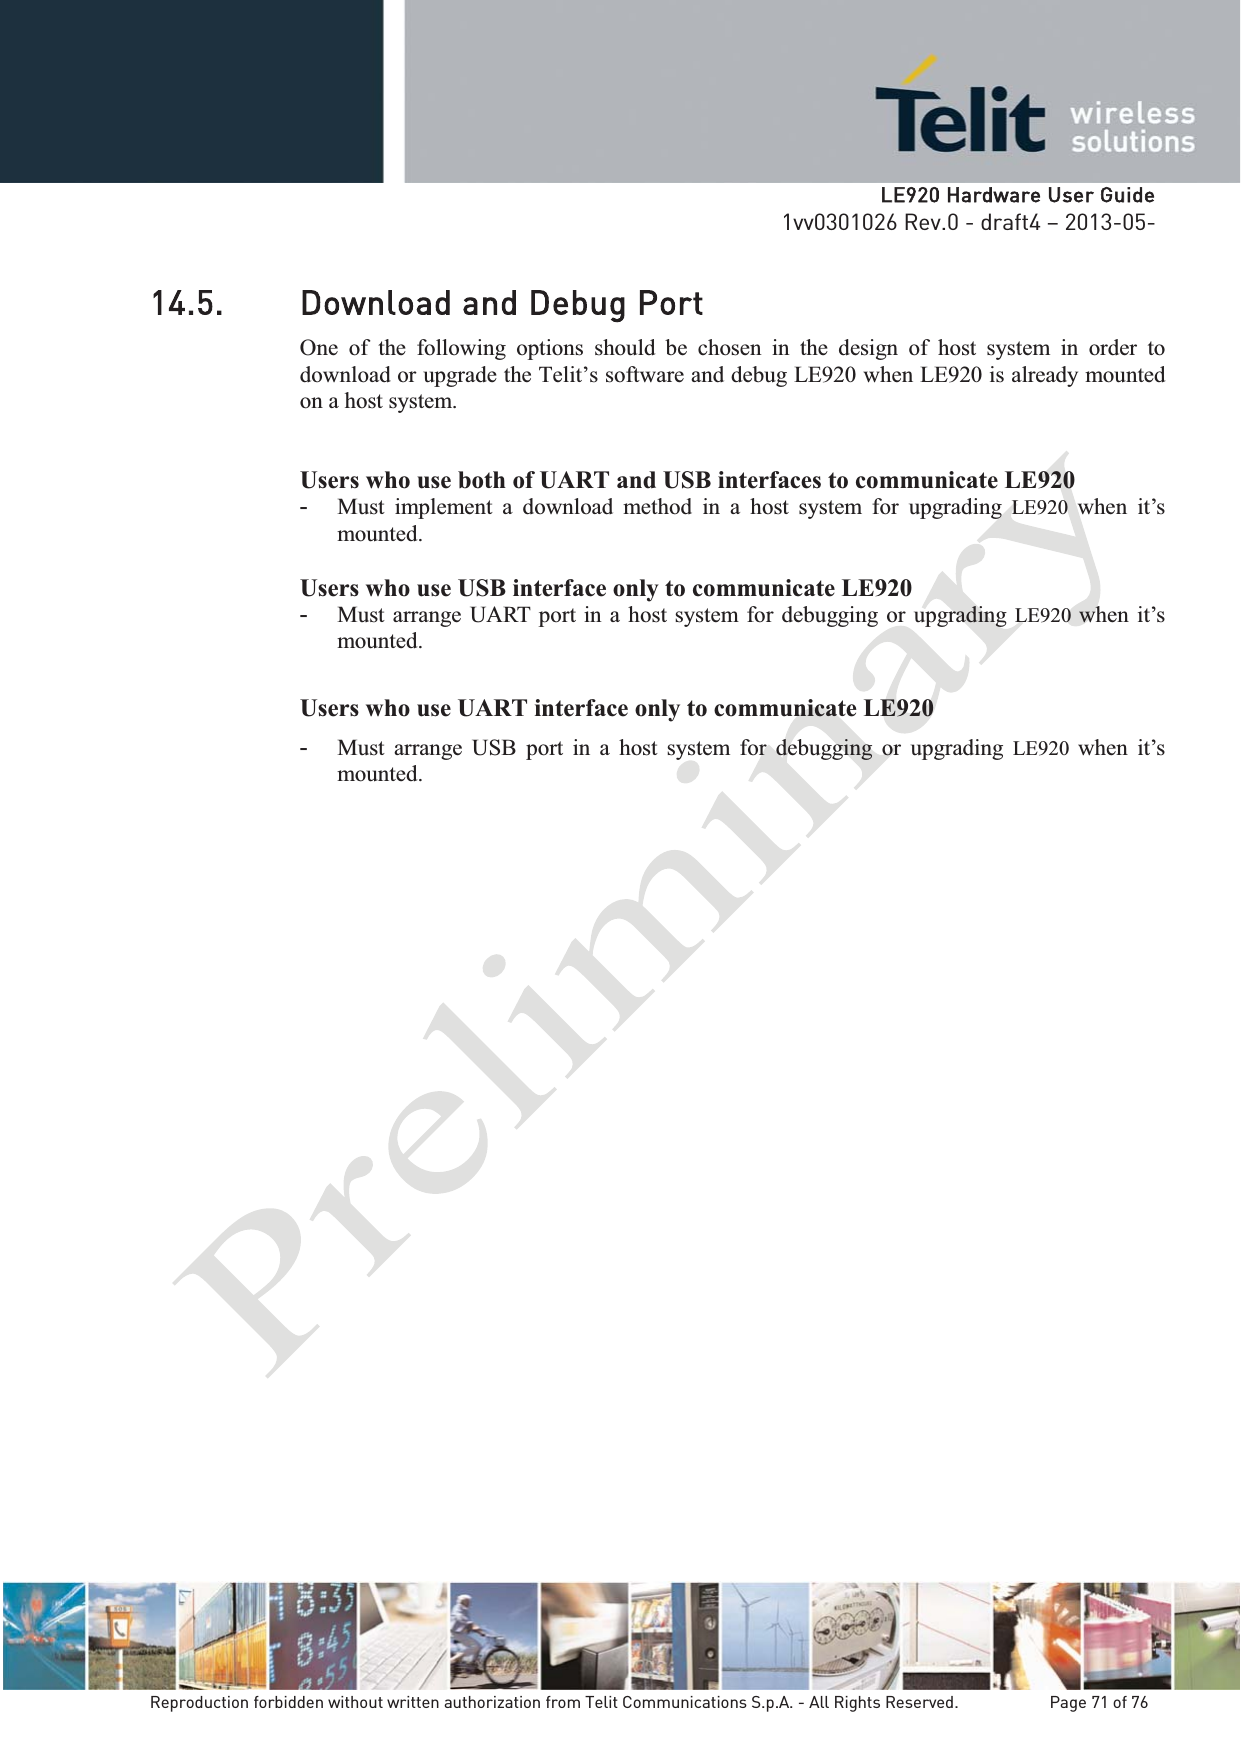   LLE920 Hardware User Guide1vv0301026 Rev.0 - draft4 – 2013-05-Reproduction forbidden without written authorization from Telit Communications S.p.A. - All Rights Reserved.    Page 71 of 76 14.5. Download and Debug Port One of the following options should be chosen in the design of host system in order to download or upgrade the Telit’s software and debug LE920 when LE920 is already mounted on a host system.  Users who use both of UART and USB interfaces to communicate LE920 -  Must implement a download method in a host system for upgrading LE920  when it’s mounted.  Users who use USB interface only to communicate LE920-  Must arrange UART port in a host system for debugging or upgrading LE920 when it’s mounted.  Users who use UART interface only to communicate LE920 -  Must arrange USB port in a host system for debugging or upgrading LE920  when it’s mounted.   